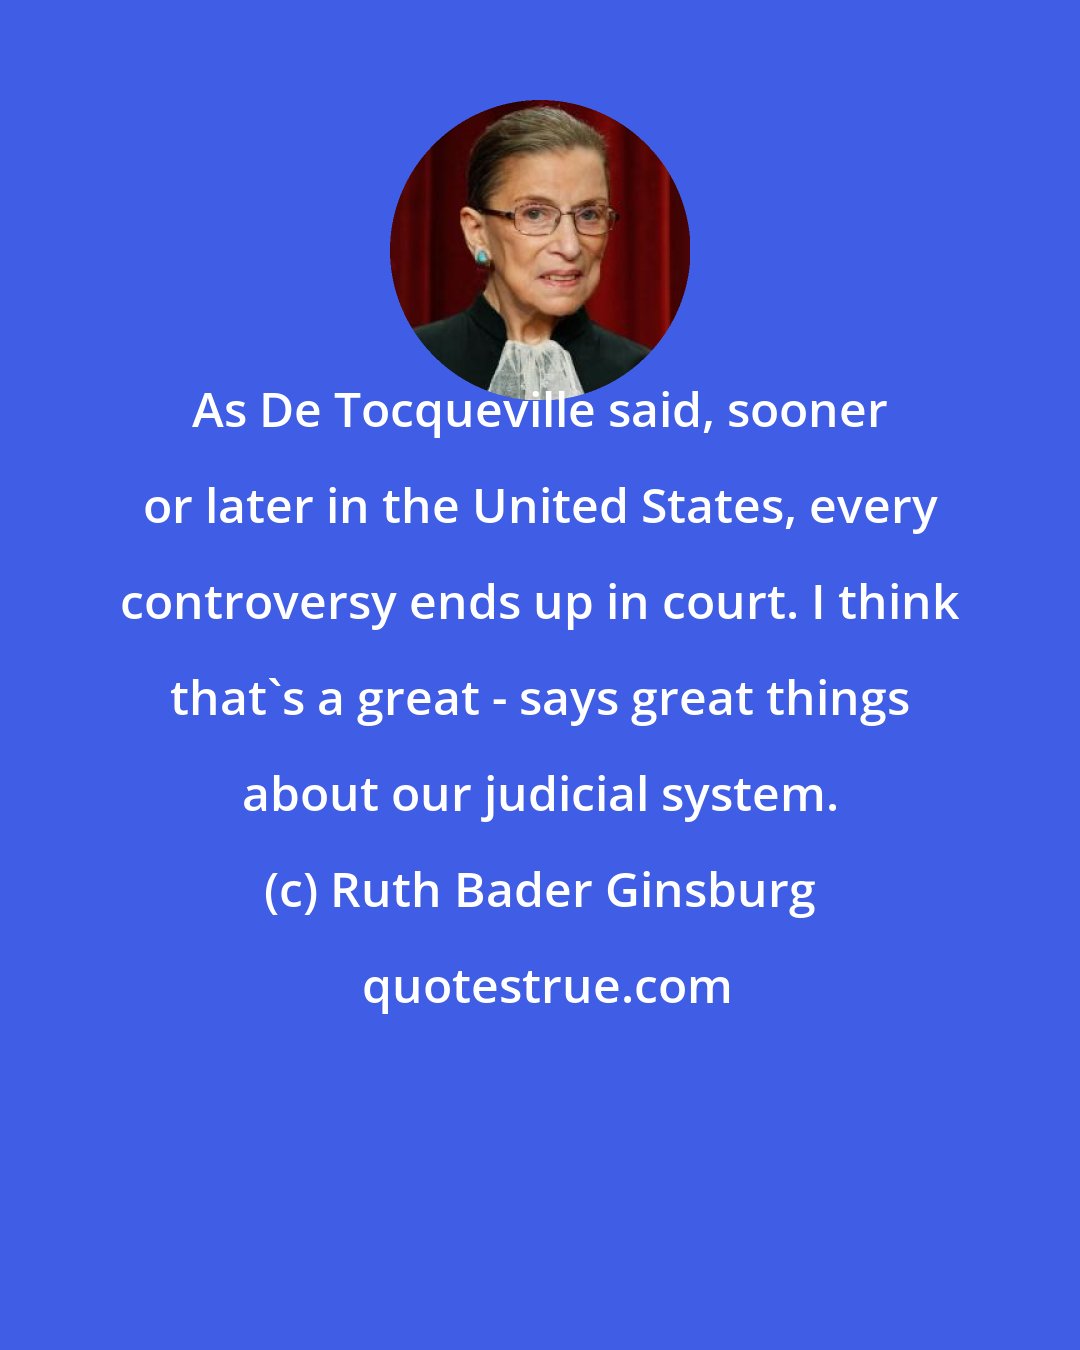 Ruth Bader Ginsburg: As De Tocqueville said, sooner or later in the United States, every controversy ends up in court. I think that's a great - says great things about our judicial system.